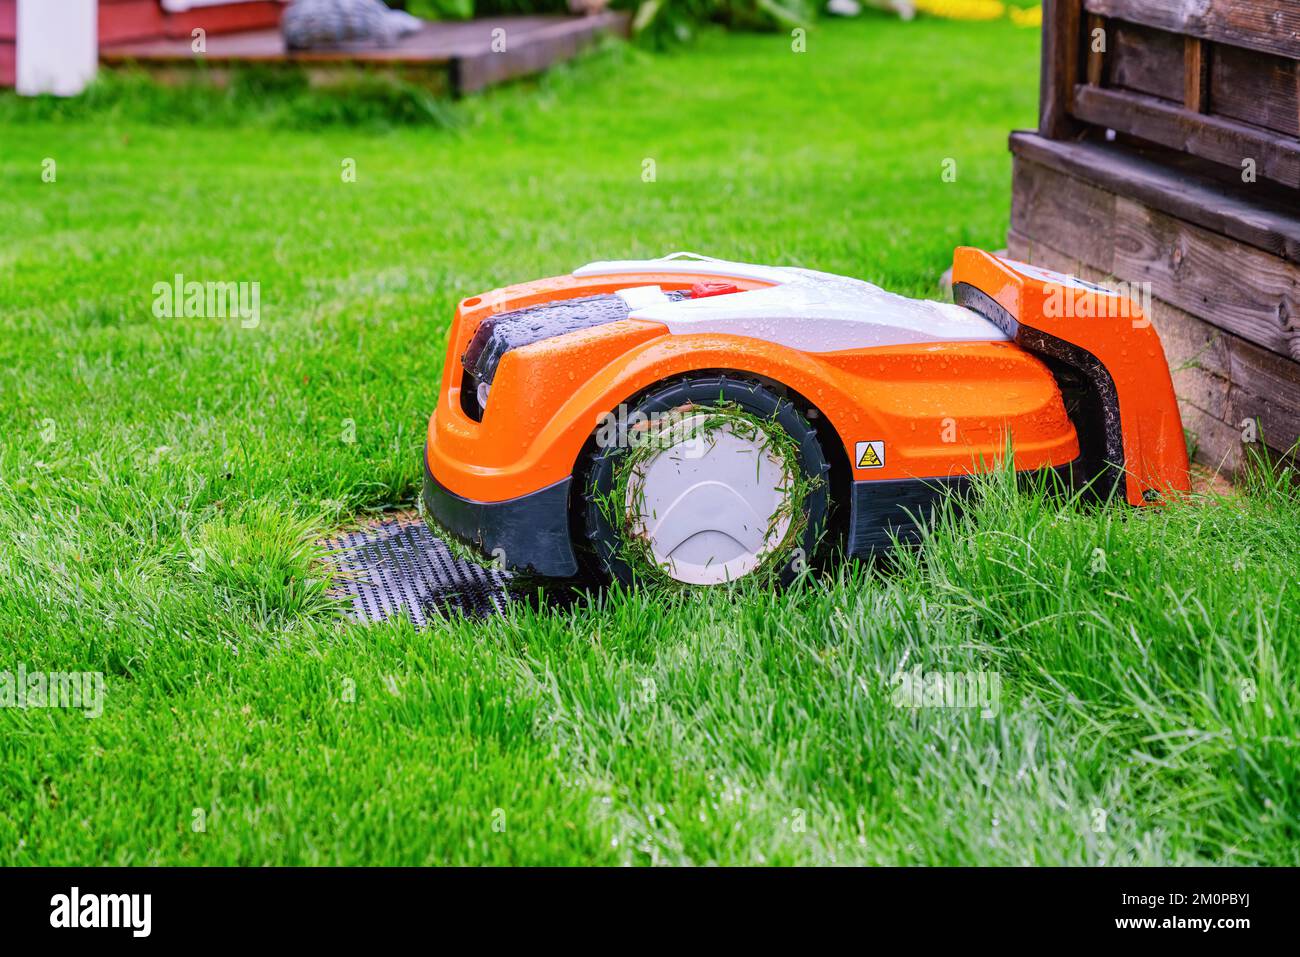 Automatic lawn robot mower under rain at charging stations on the grass, lawn. Close up side view with blurry background Stock Photo